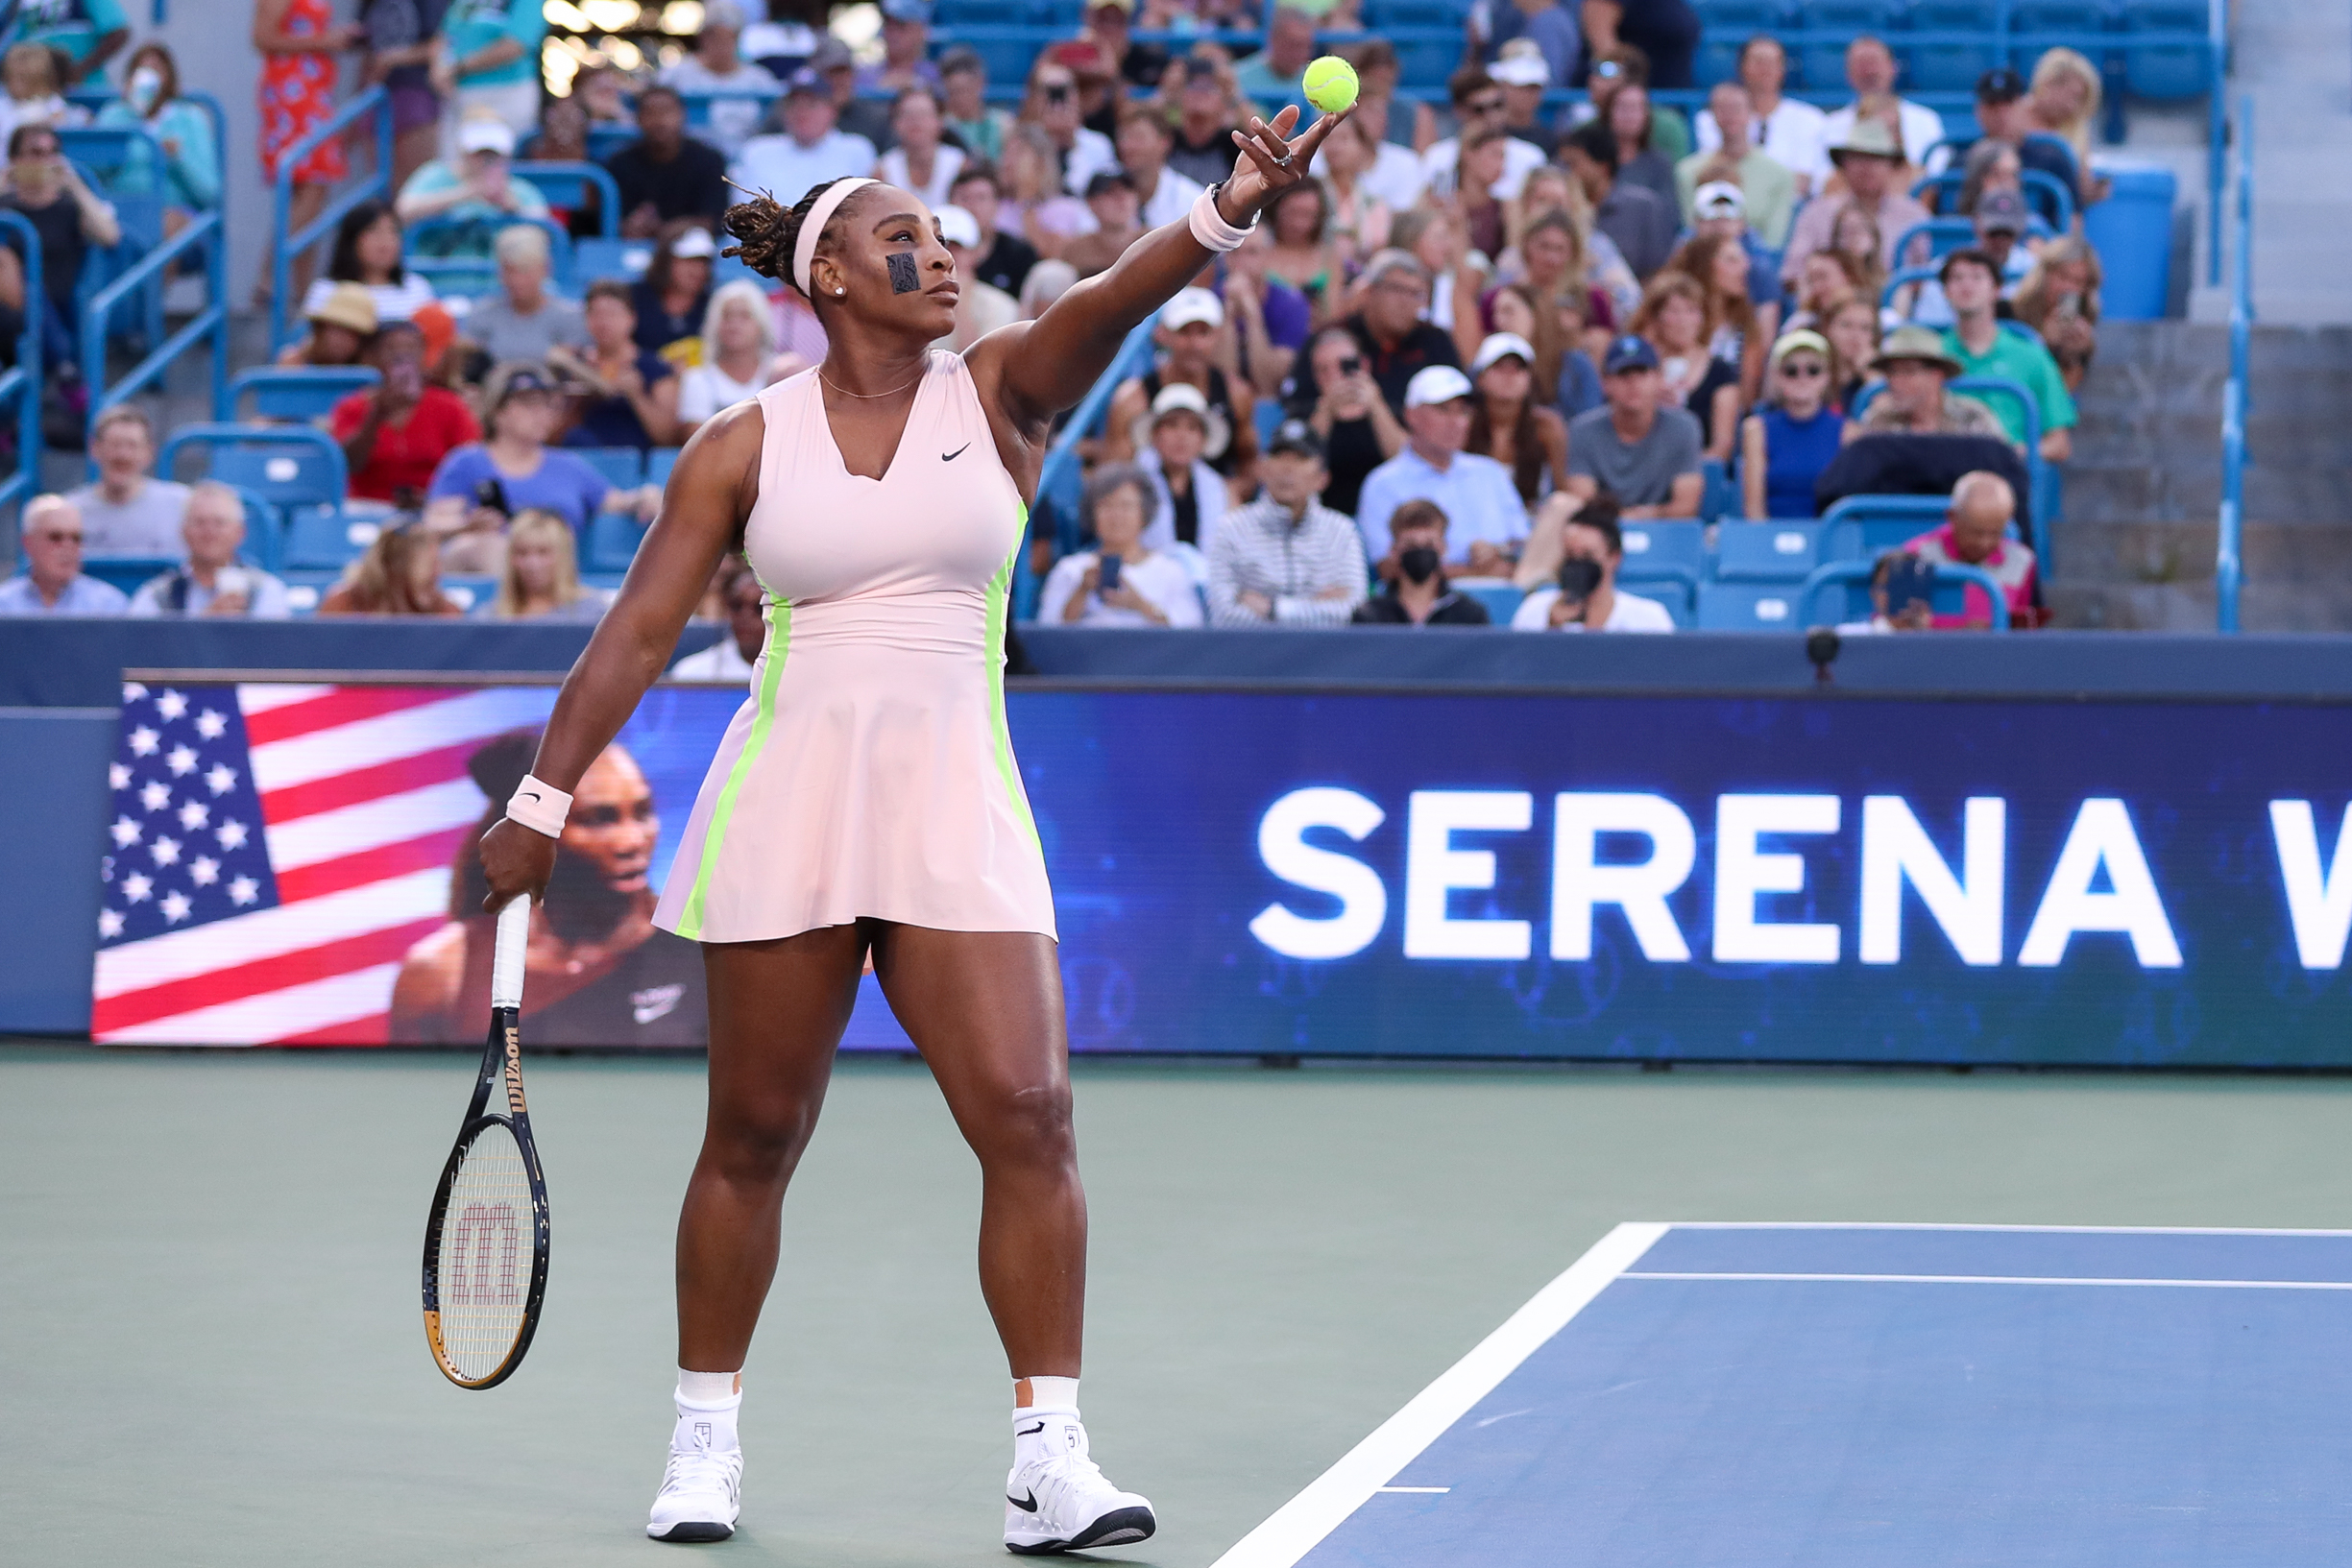 When does Serena Williams play? U.S